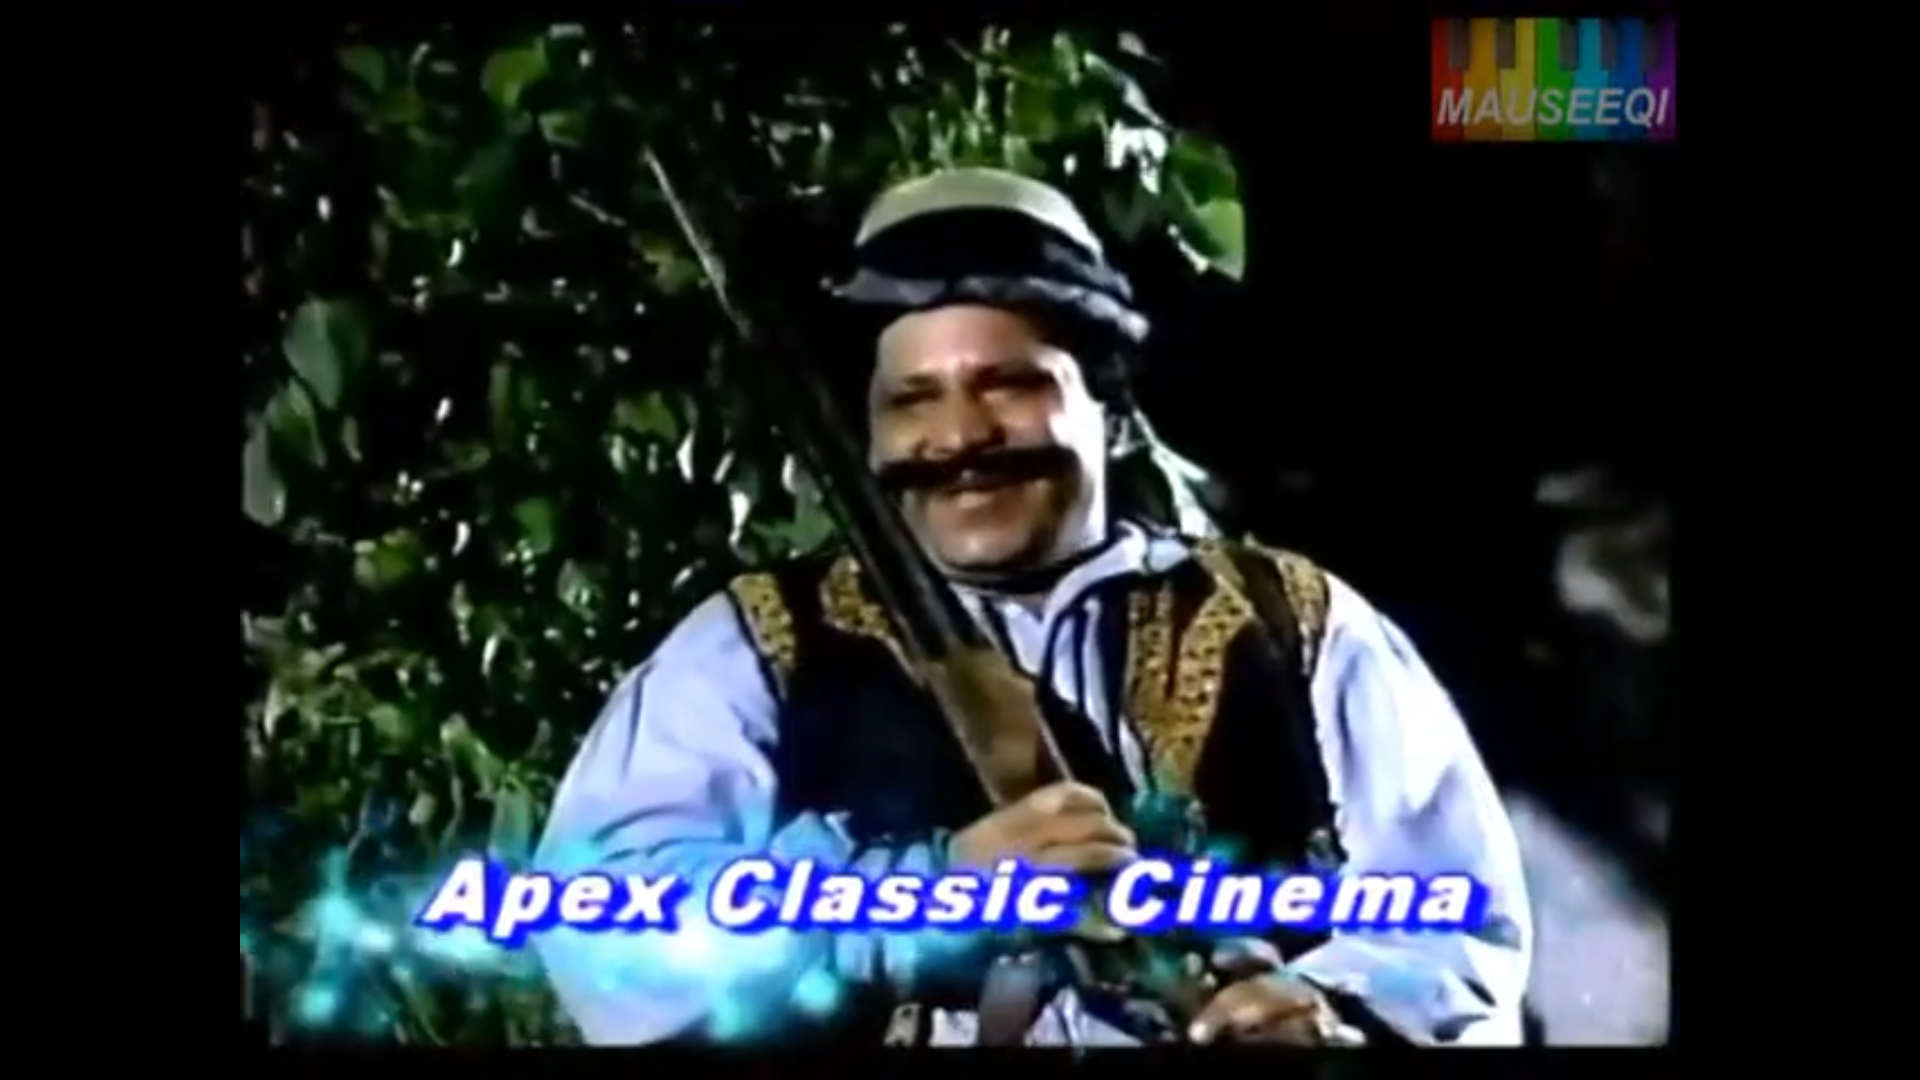 A screenshot from Dr. Bukhari's archives; A Pakistani actor is holding a rifle against his shoulder and smiling; the logo in the top right reads 'mauseeqi' and the banner across the bottom reads 'Apex Classic Cinema'